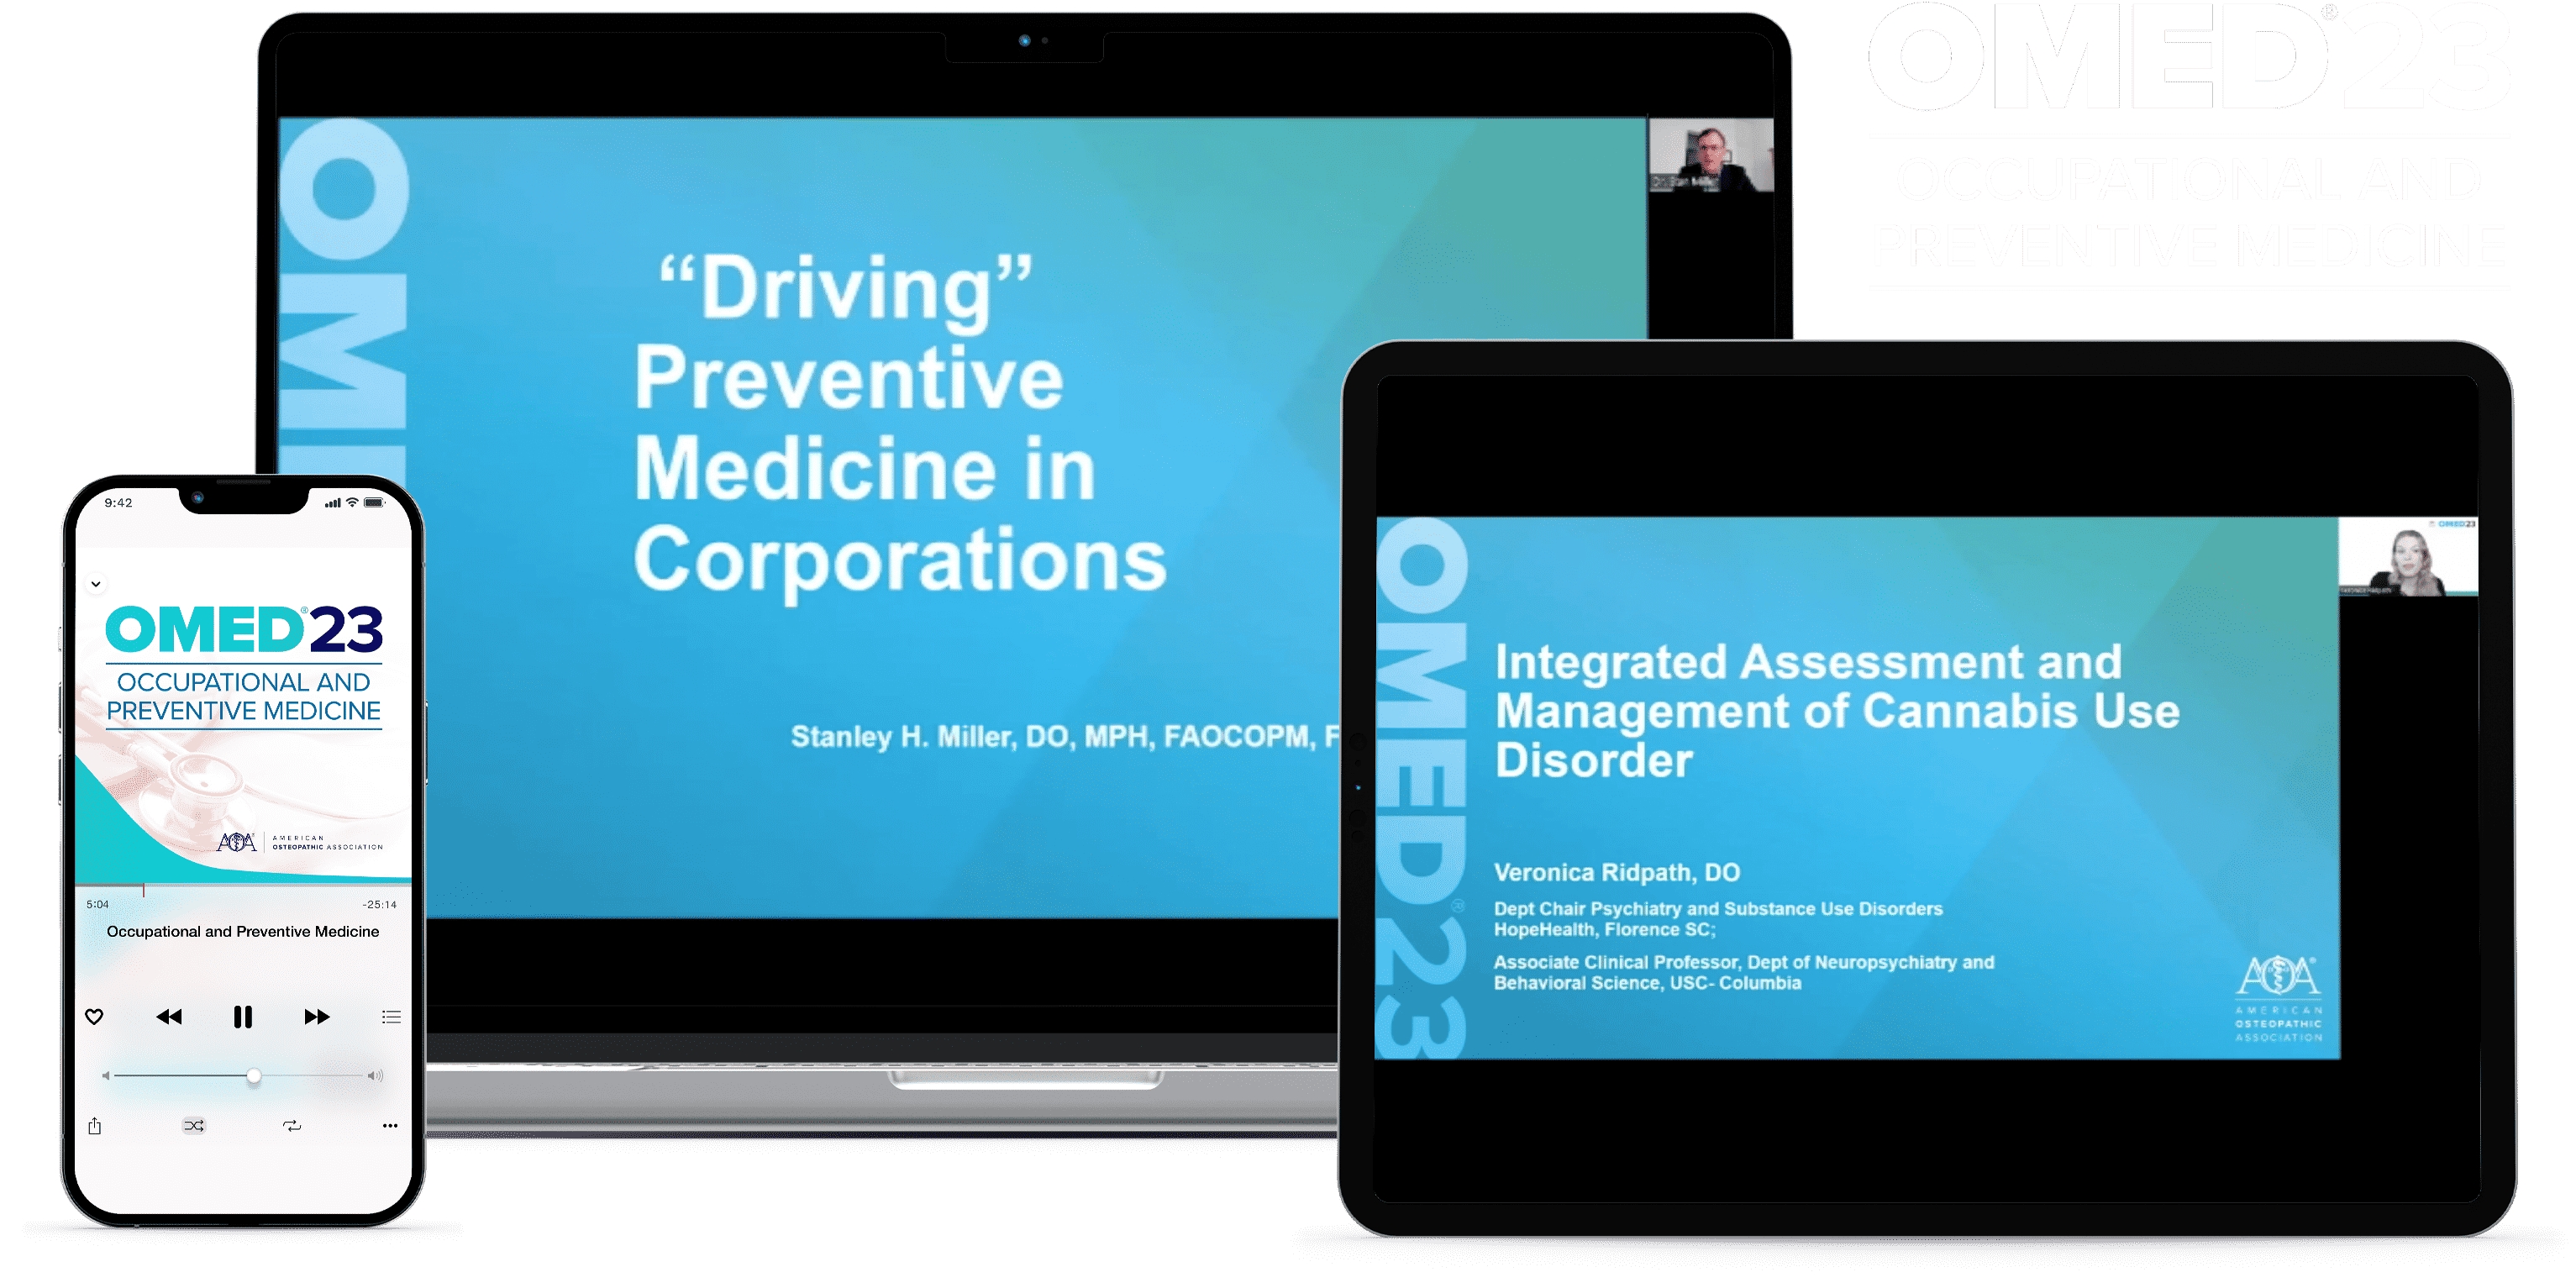 Laptop, tablet, and phone with OMED 2023 - Occupational and Preventive Medicine course on screen